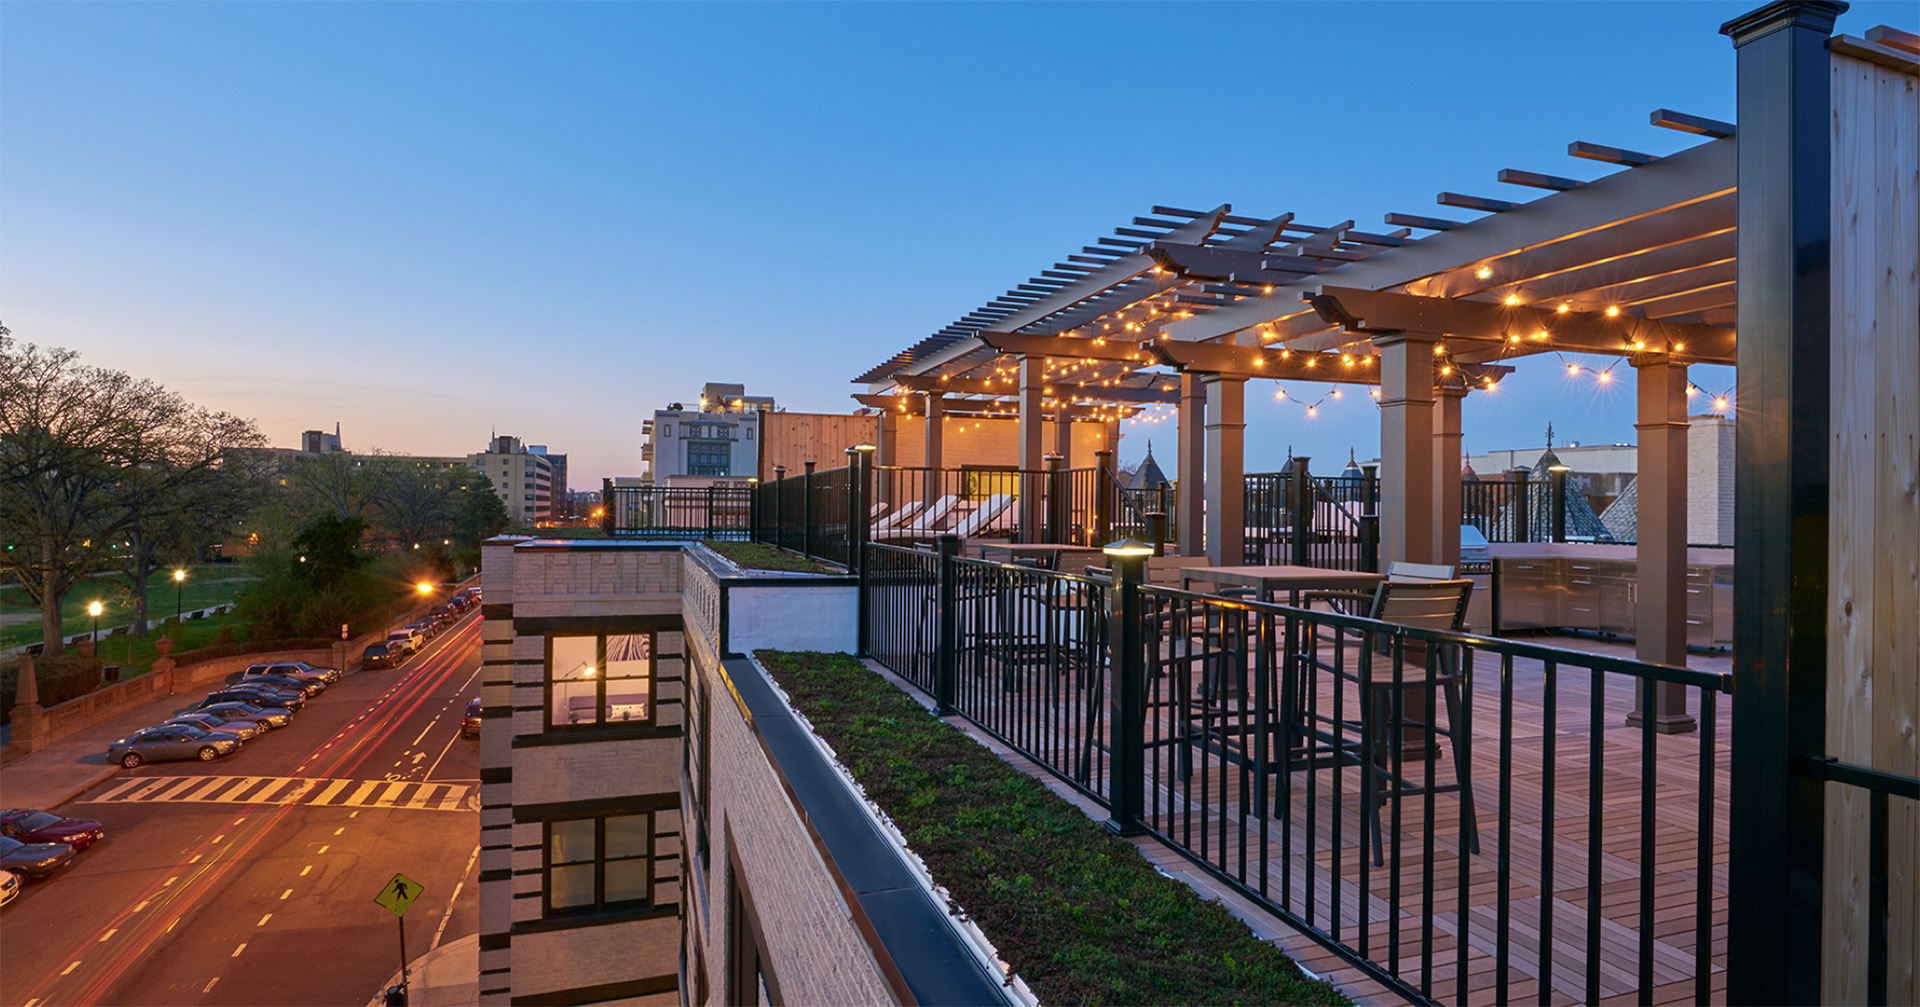 Rooftop deck showing off stunning skyline views with string lights creating a cozy outdoor space.